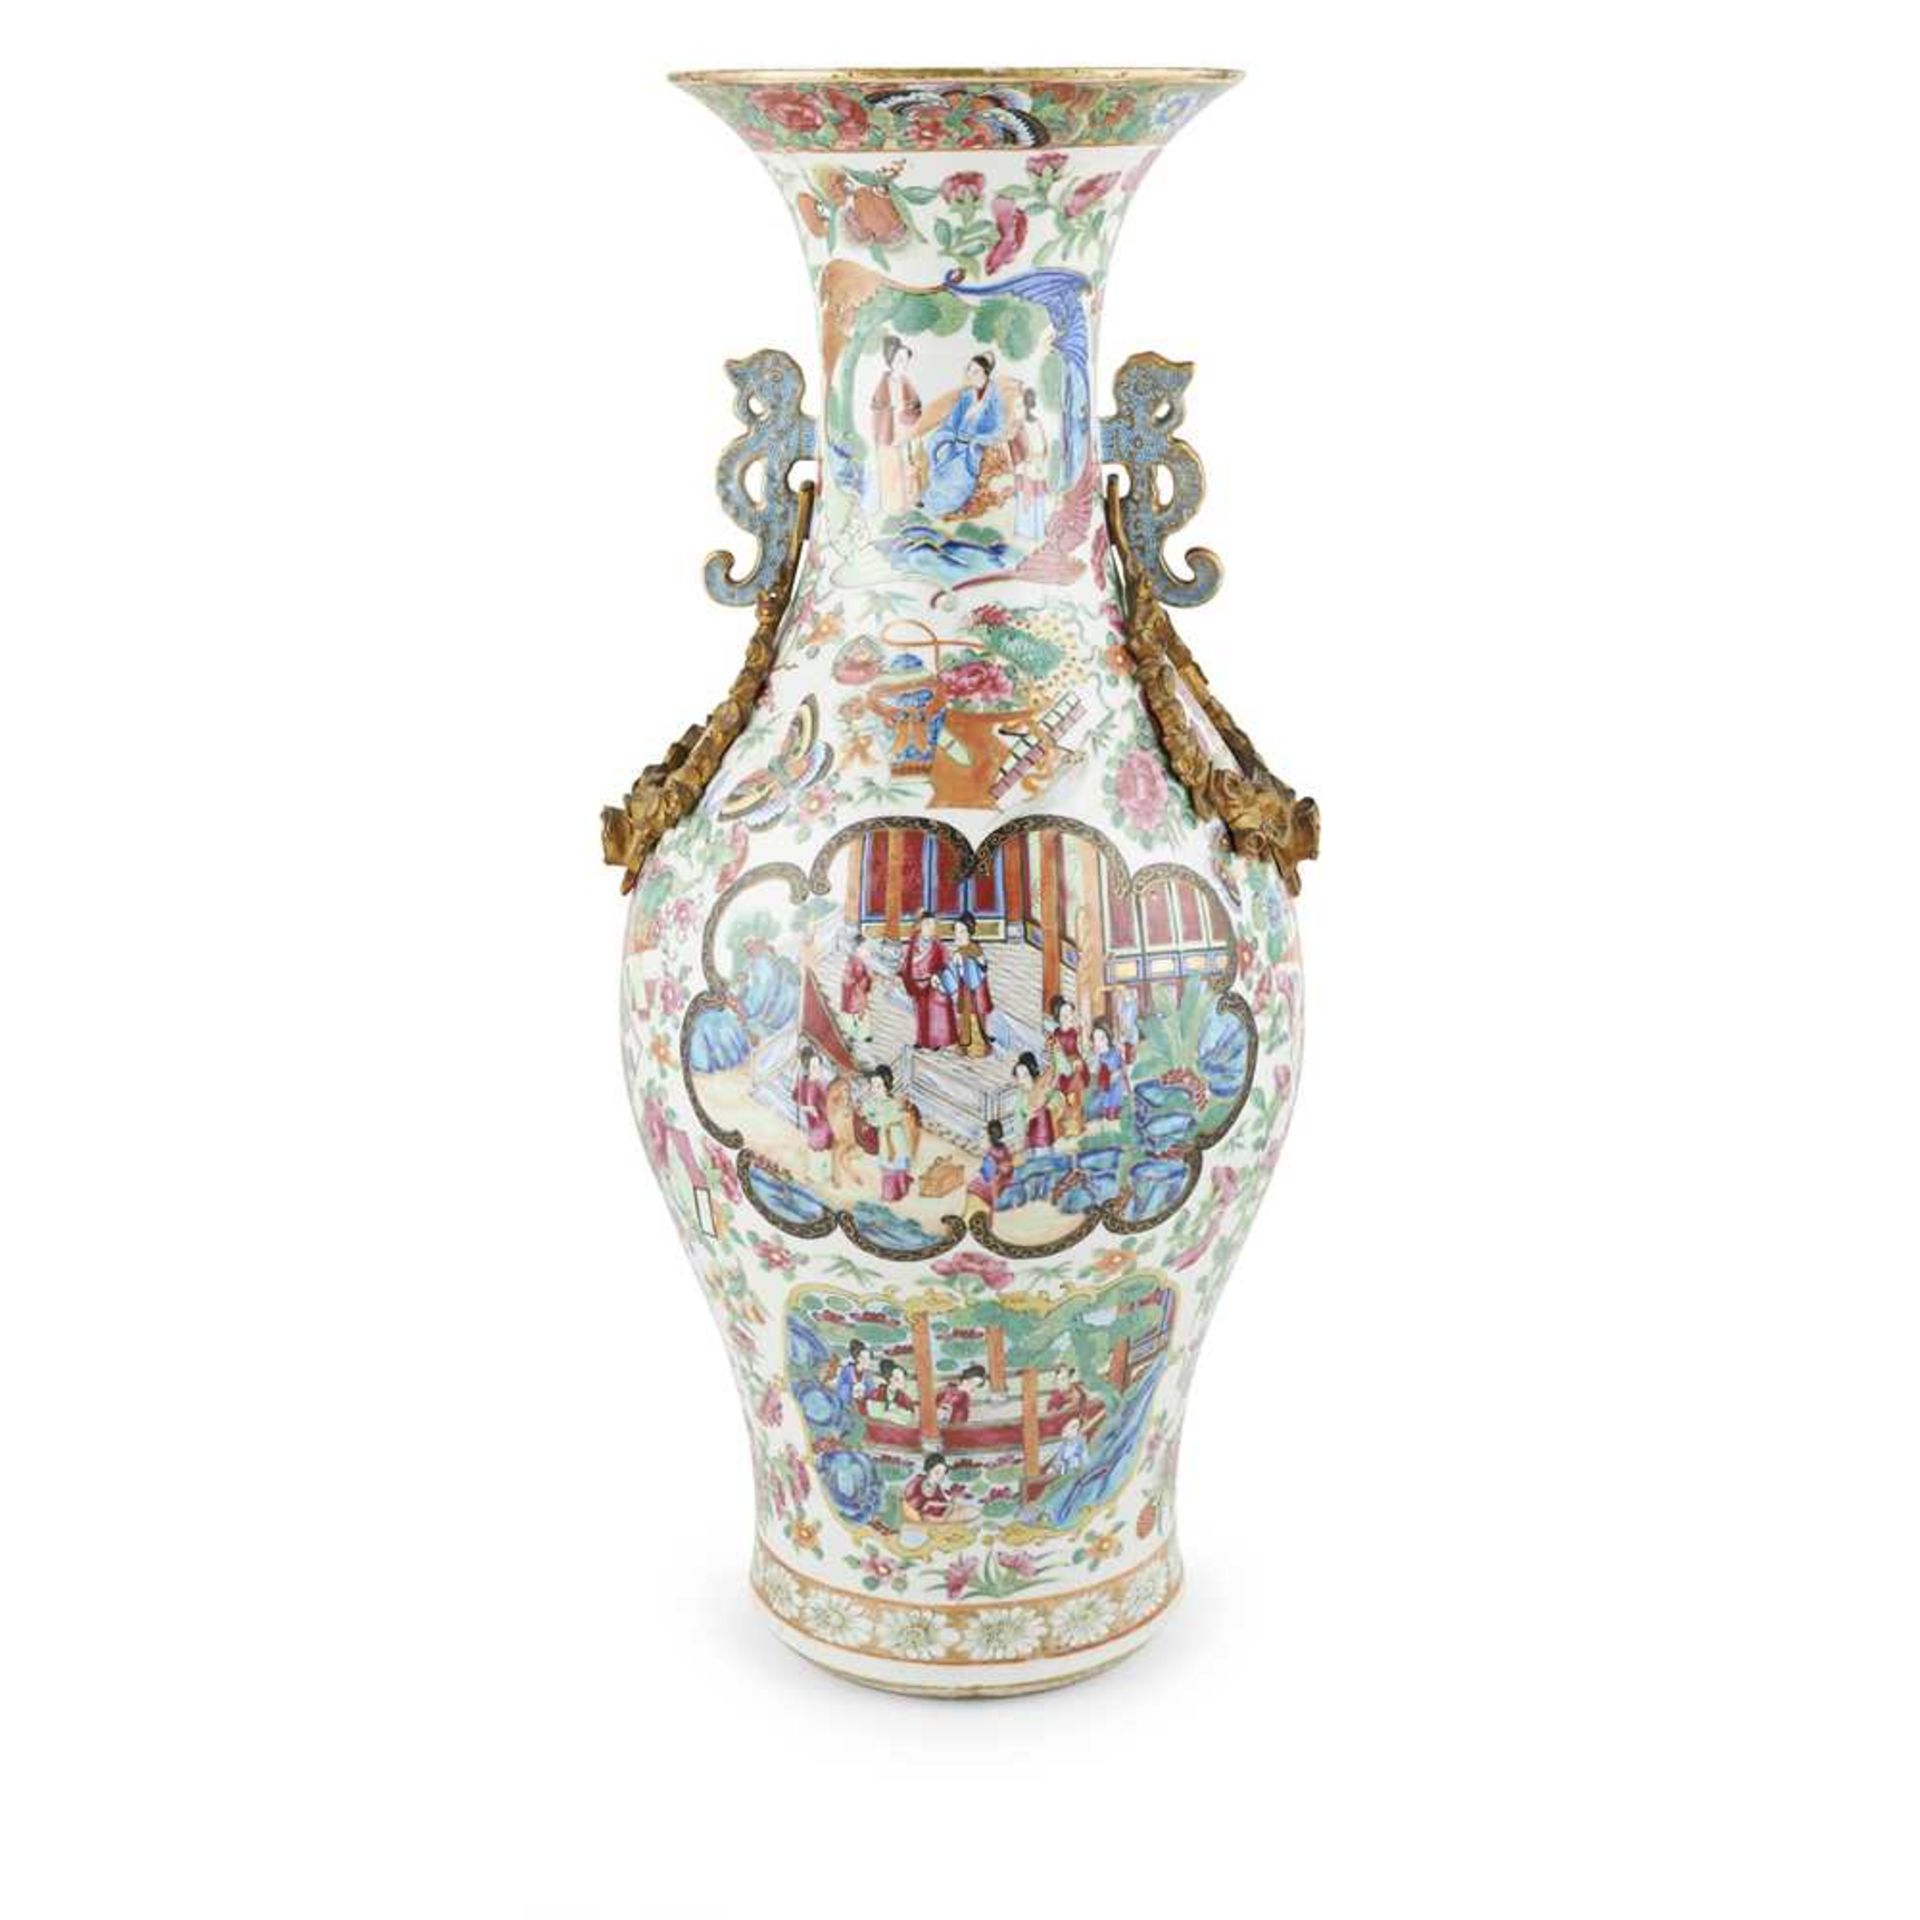 LARGE CANTON FAMILLE ROSE VASE QING DYNASTY, 19TH CENTURY